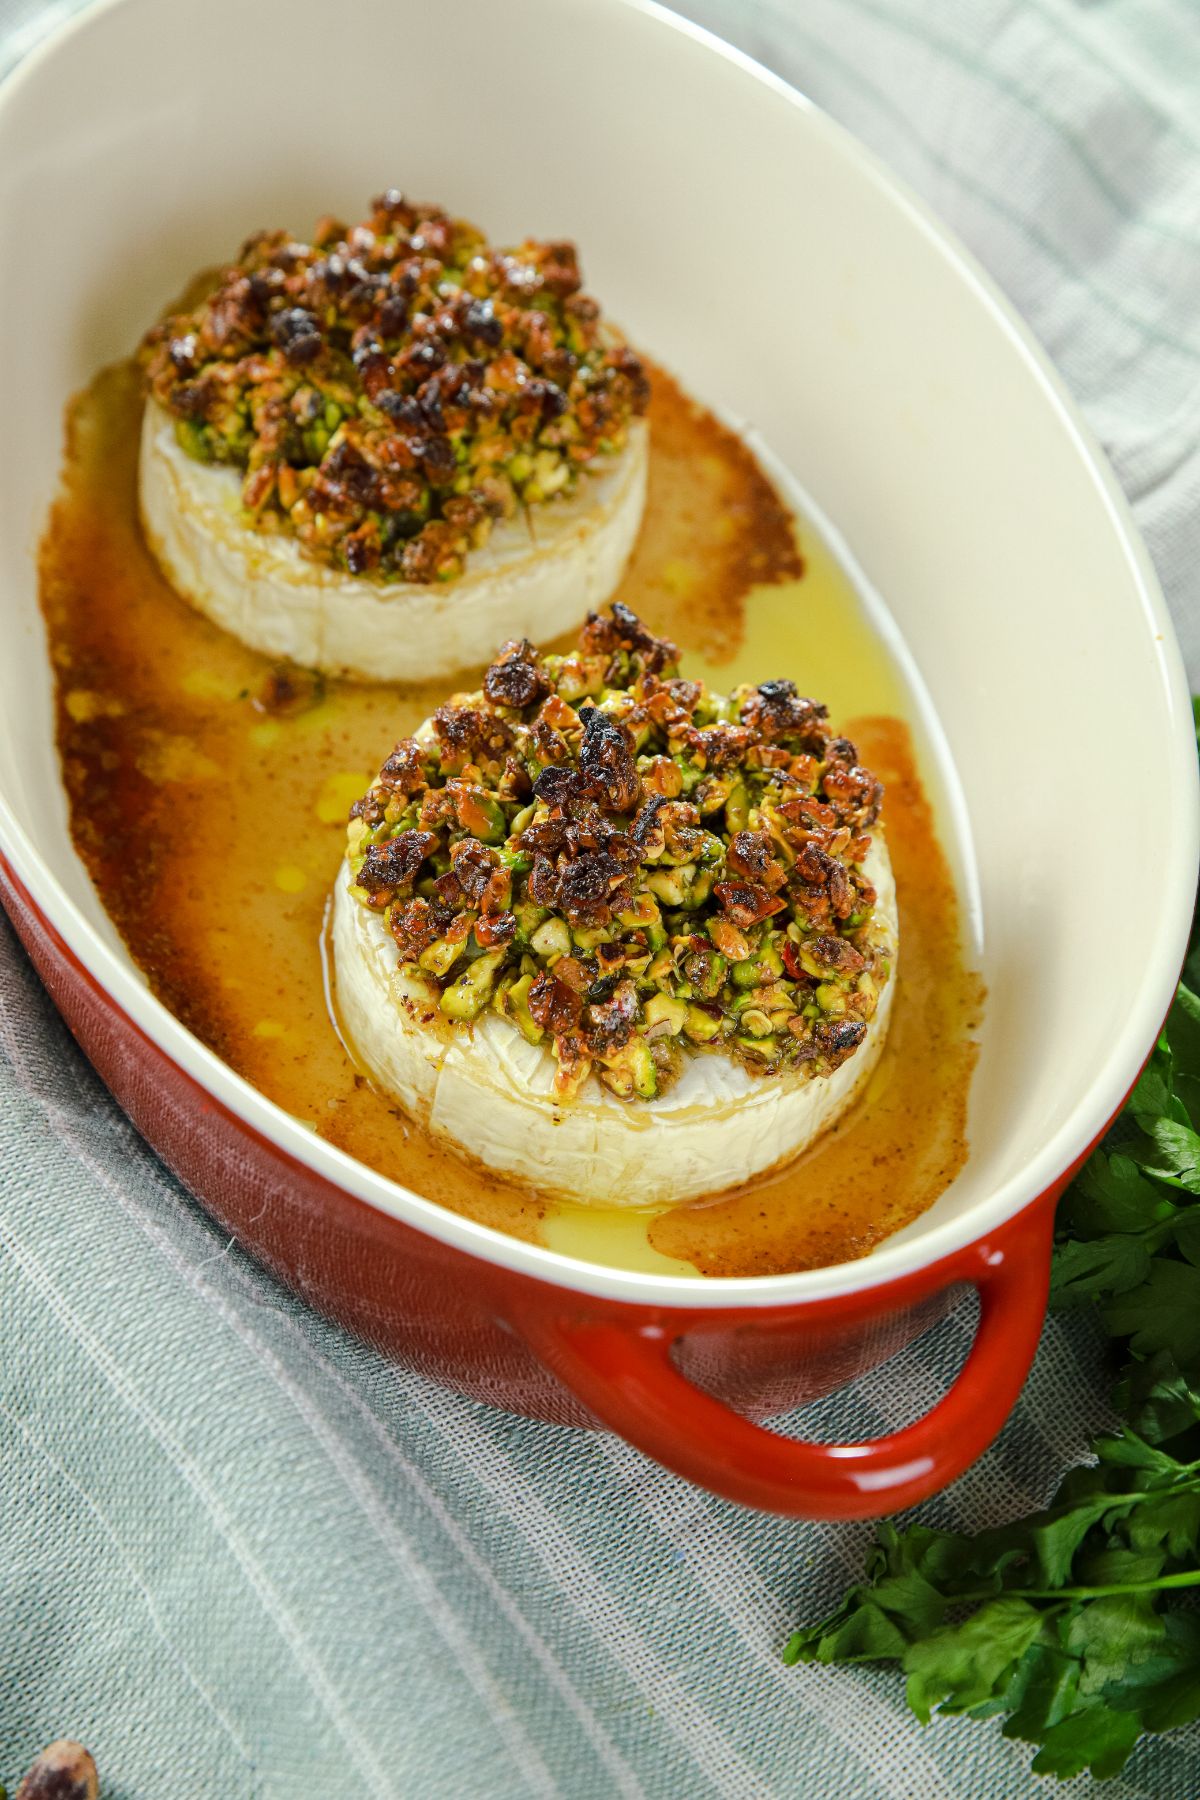 brie topped with pistachios in white and red oval baking dish on striped tablecloth